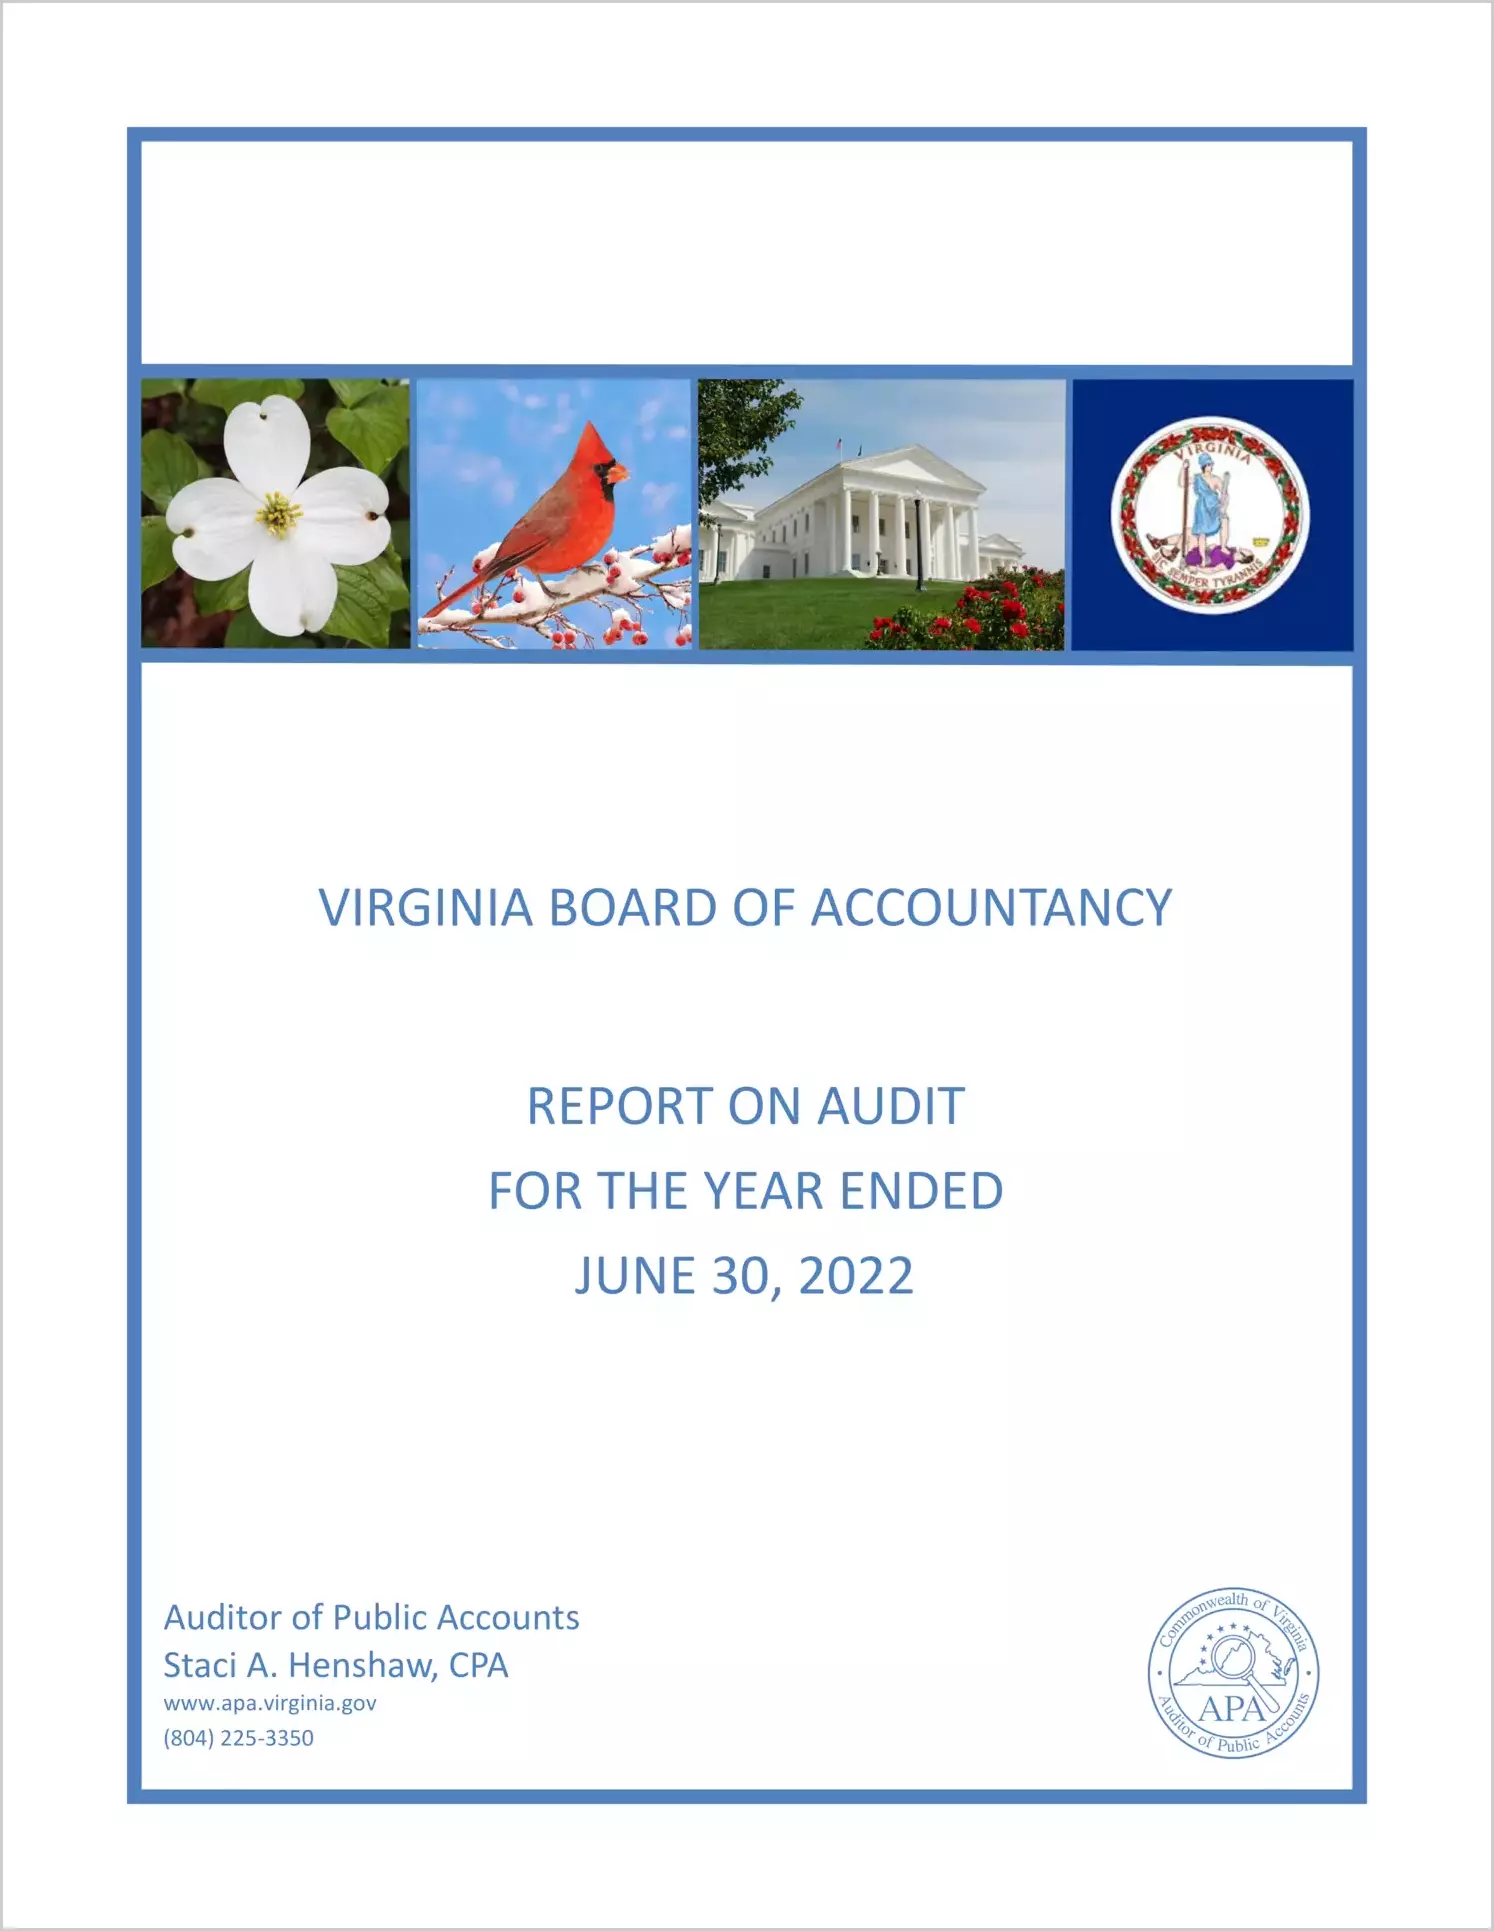 Virginia Board of Accountancy for the year ended June 30, 2022